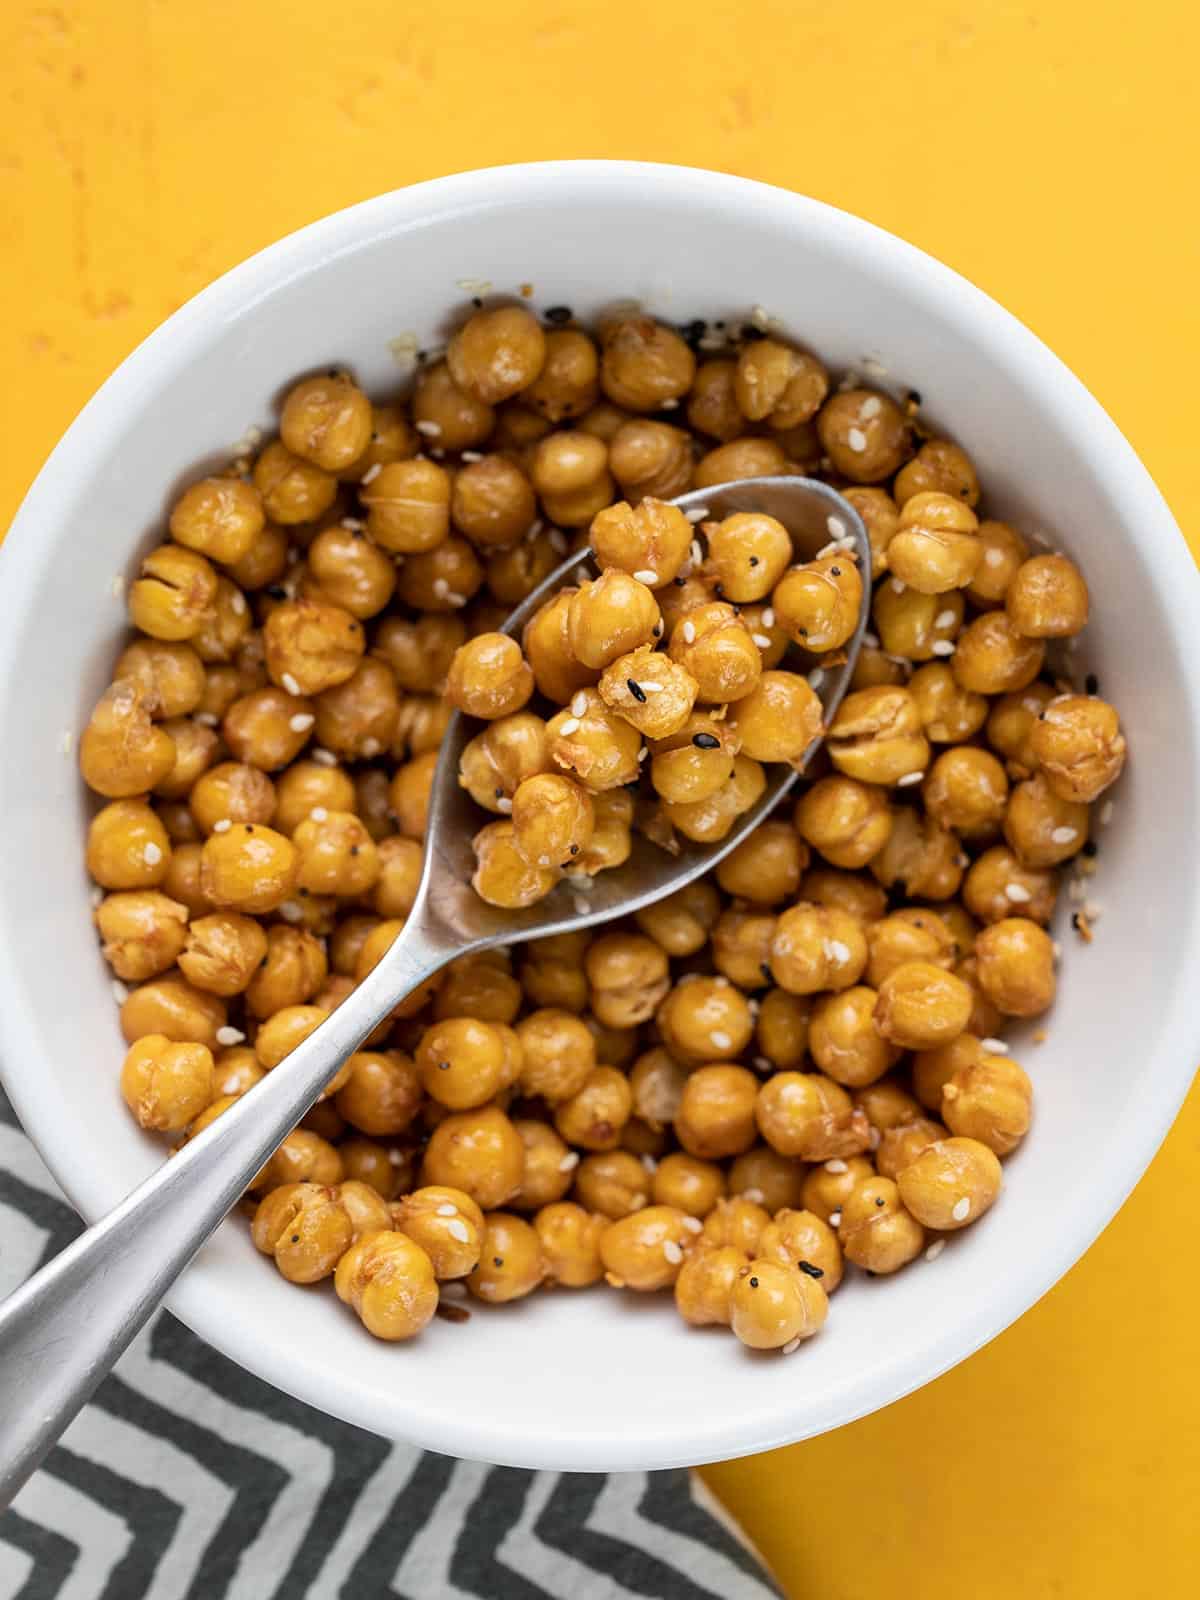 Overhead view of a bowl of air fryer chickpeas.